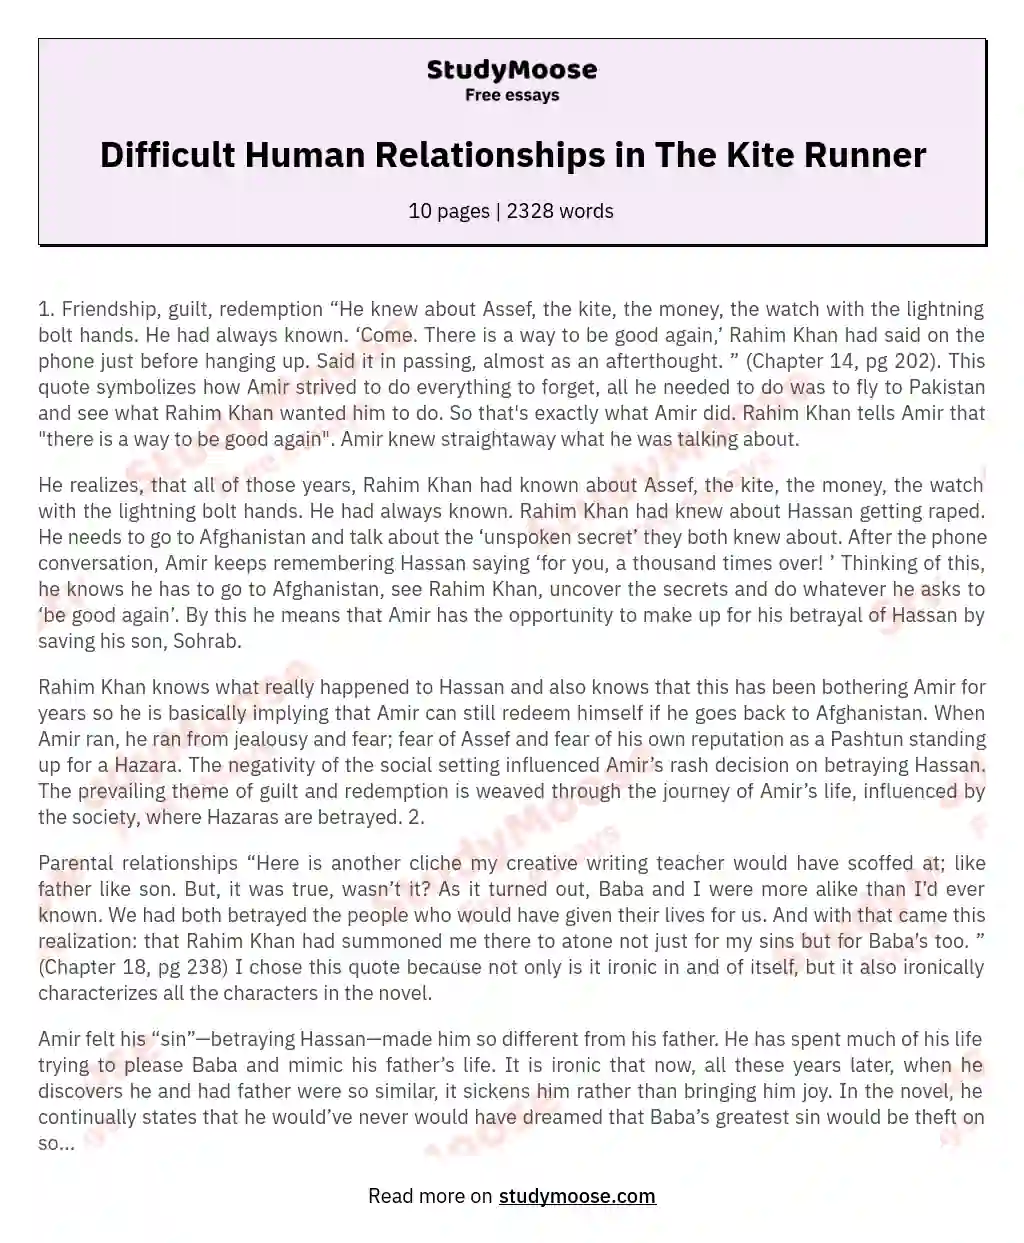 Difficult Human Relationships in The Kite Runner essay